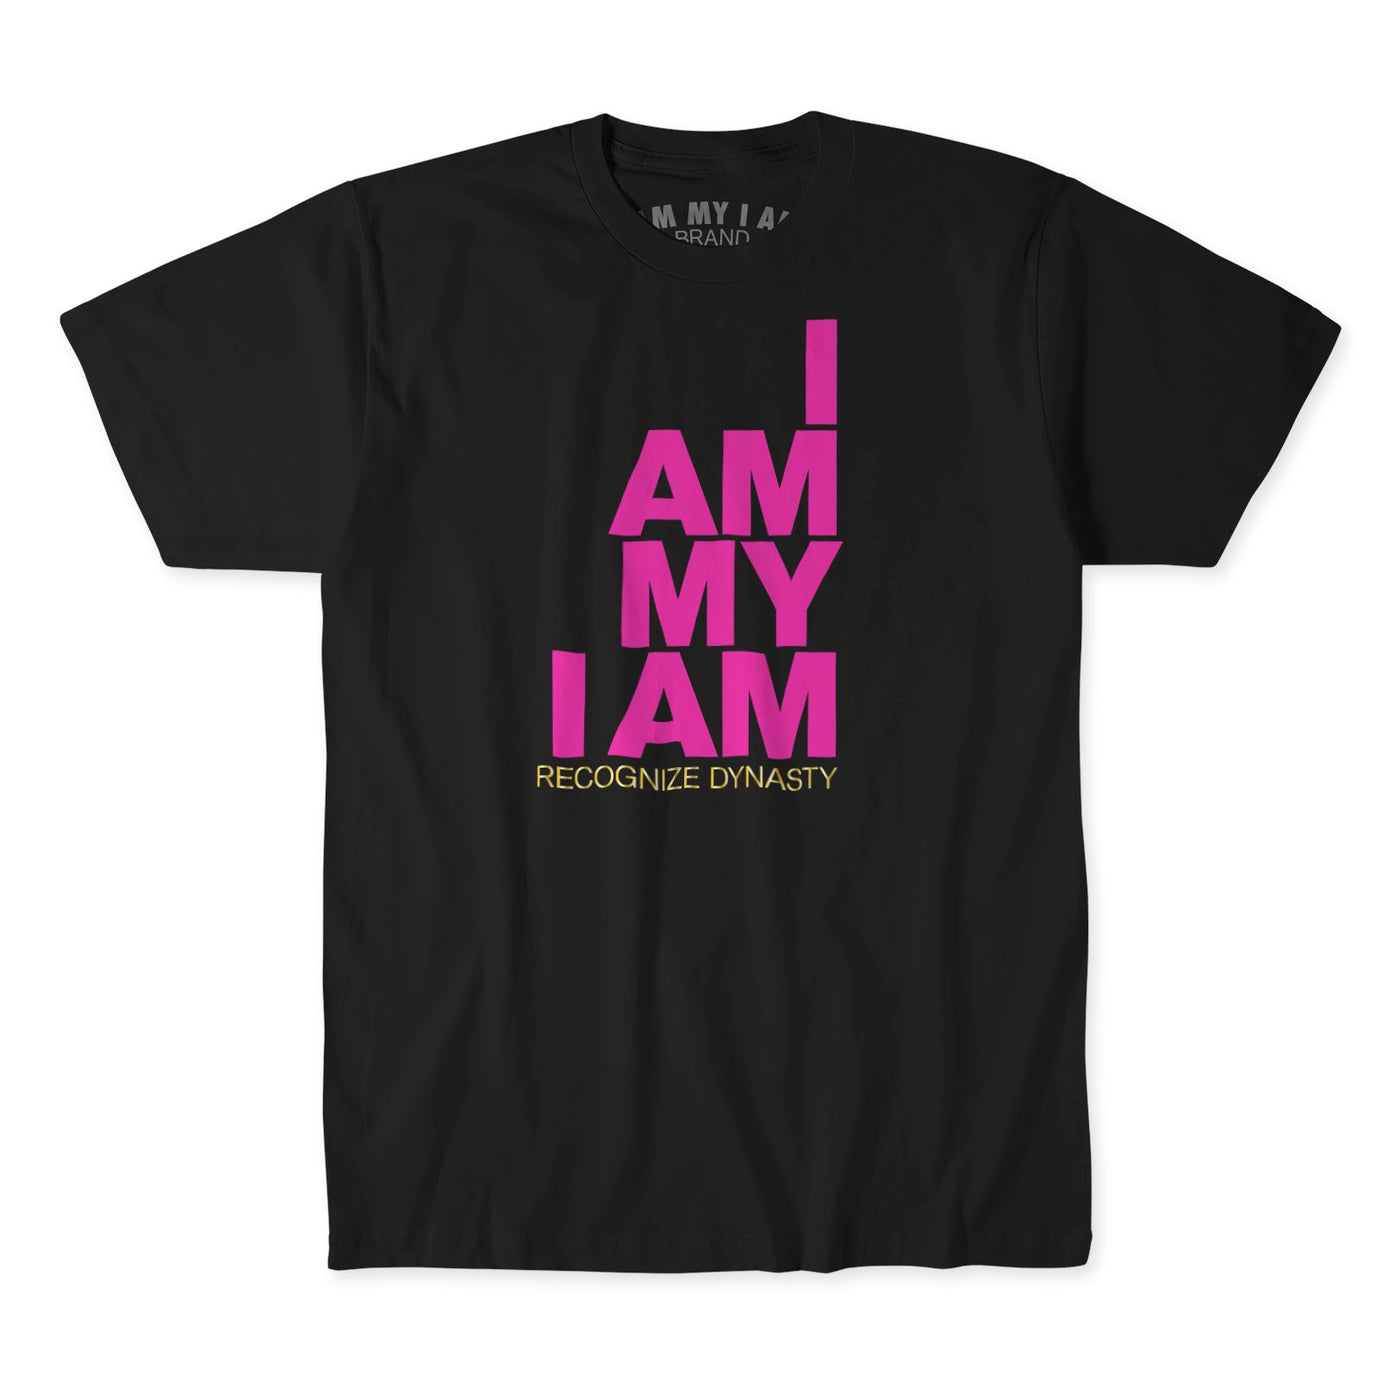 I AM MY I AM. Collection Hyperfly Tee Pink X Small